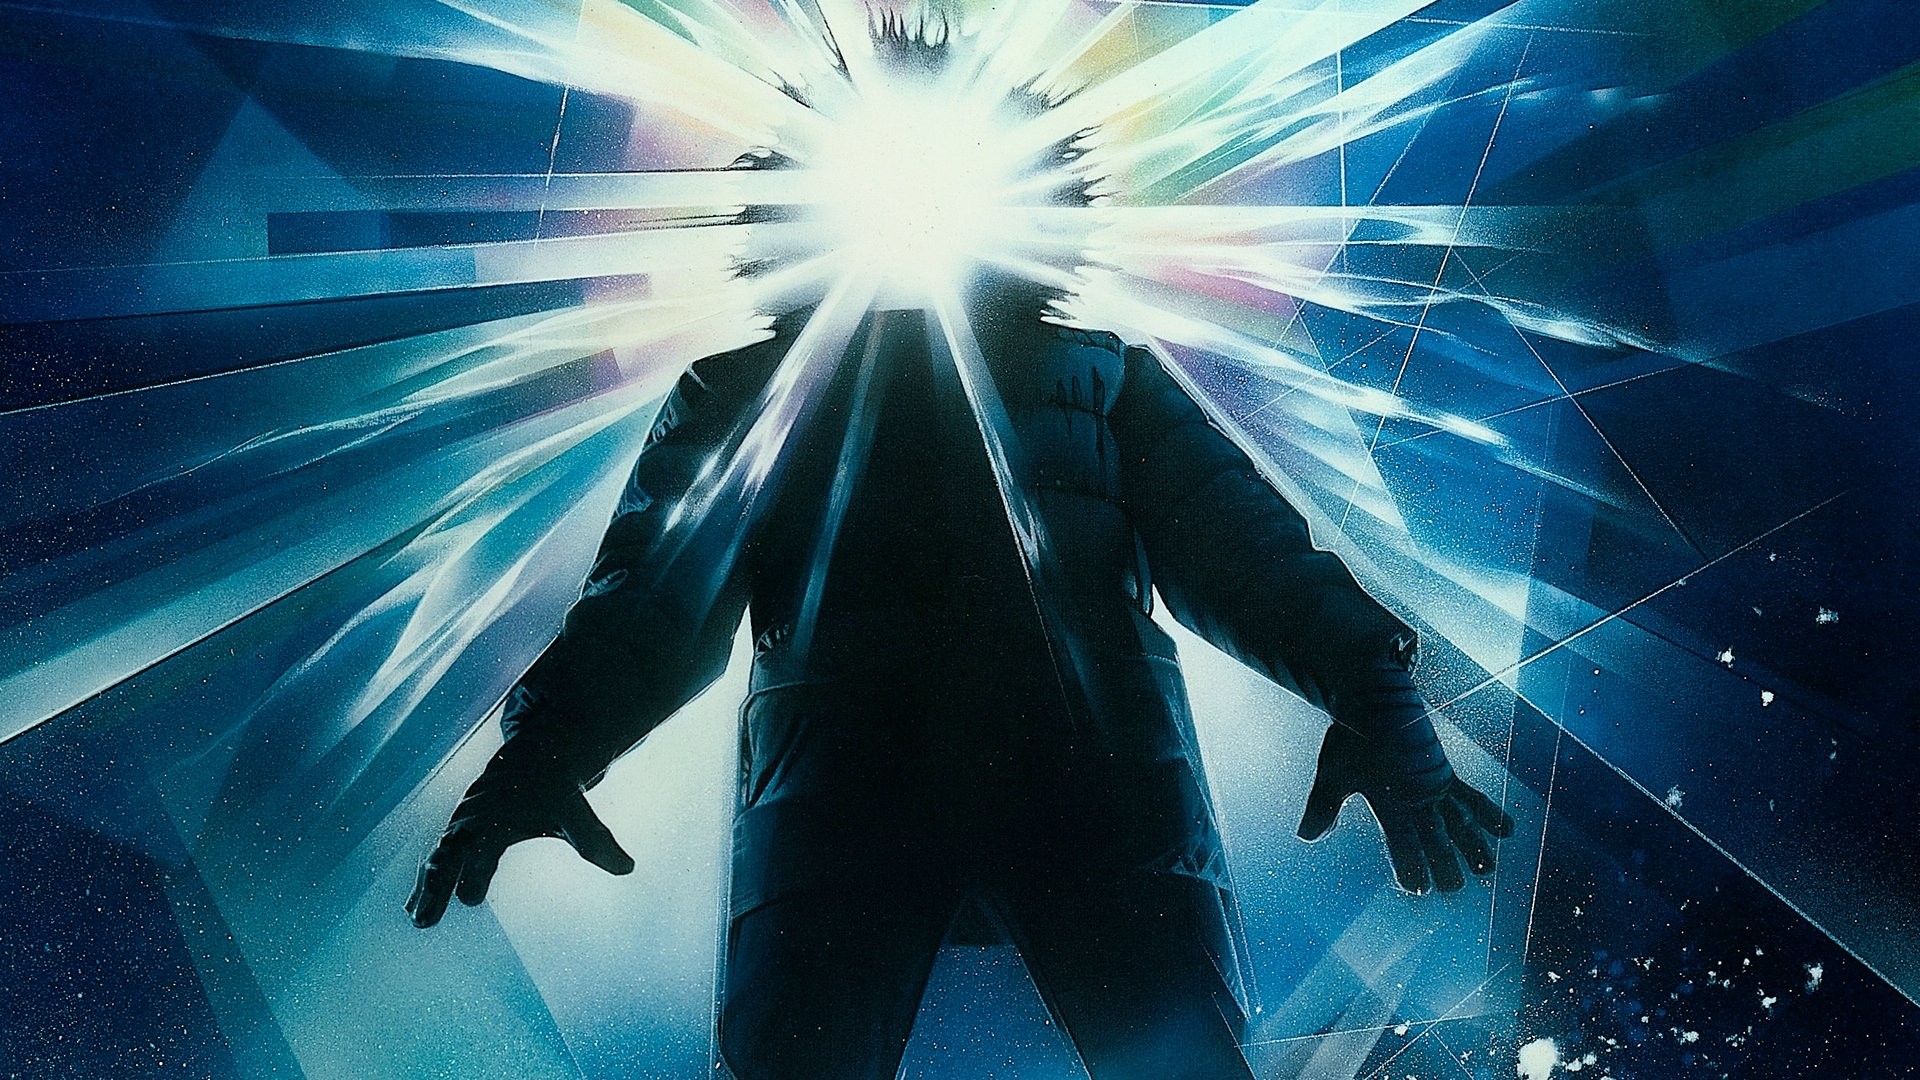 John Carpenter’s The Thing Comes To Indoor Snow